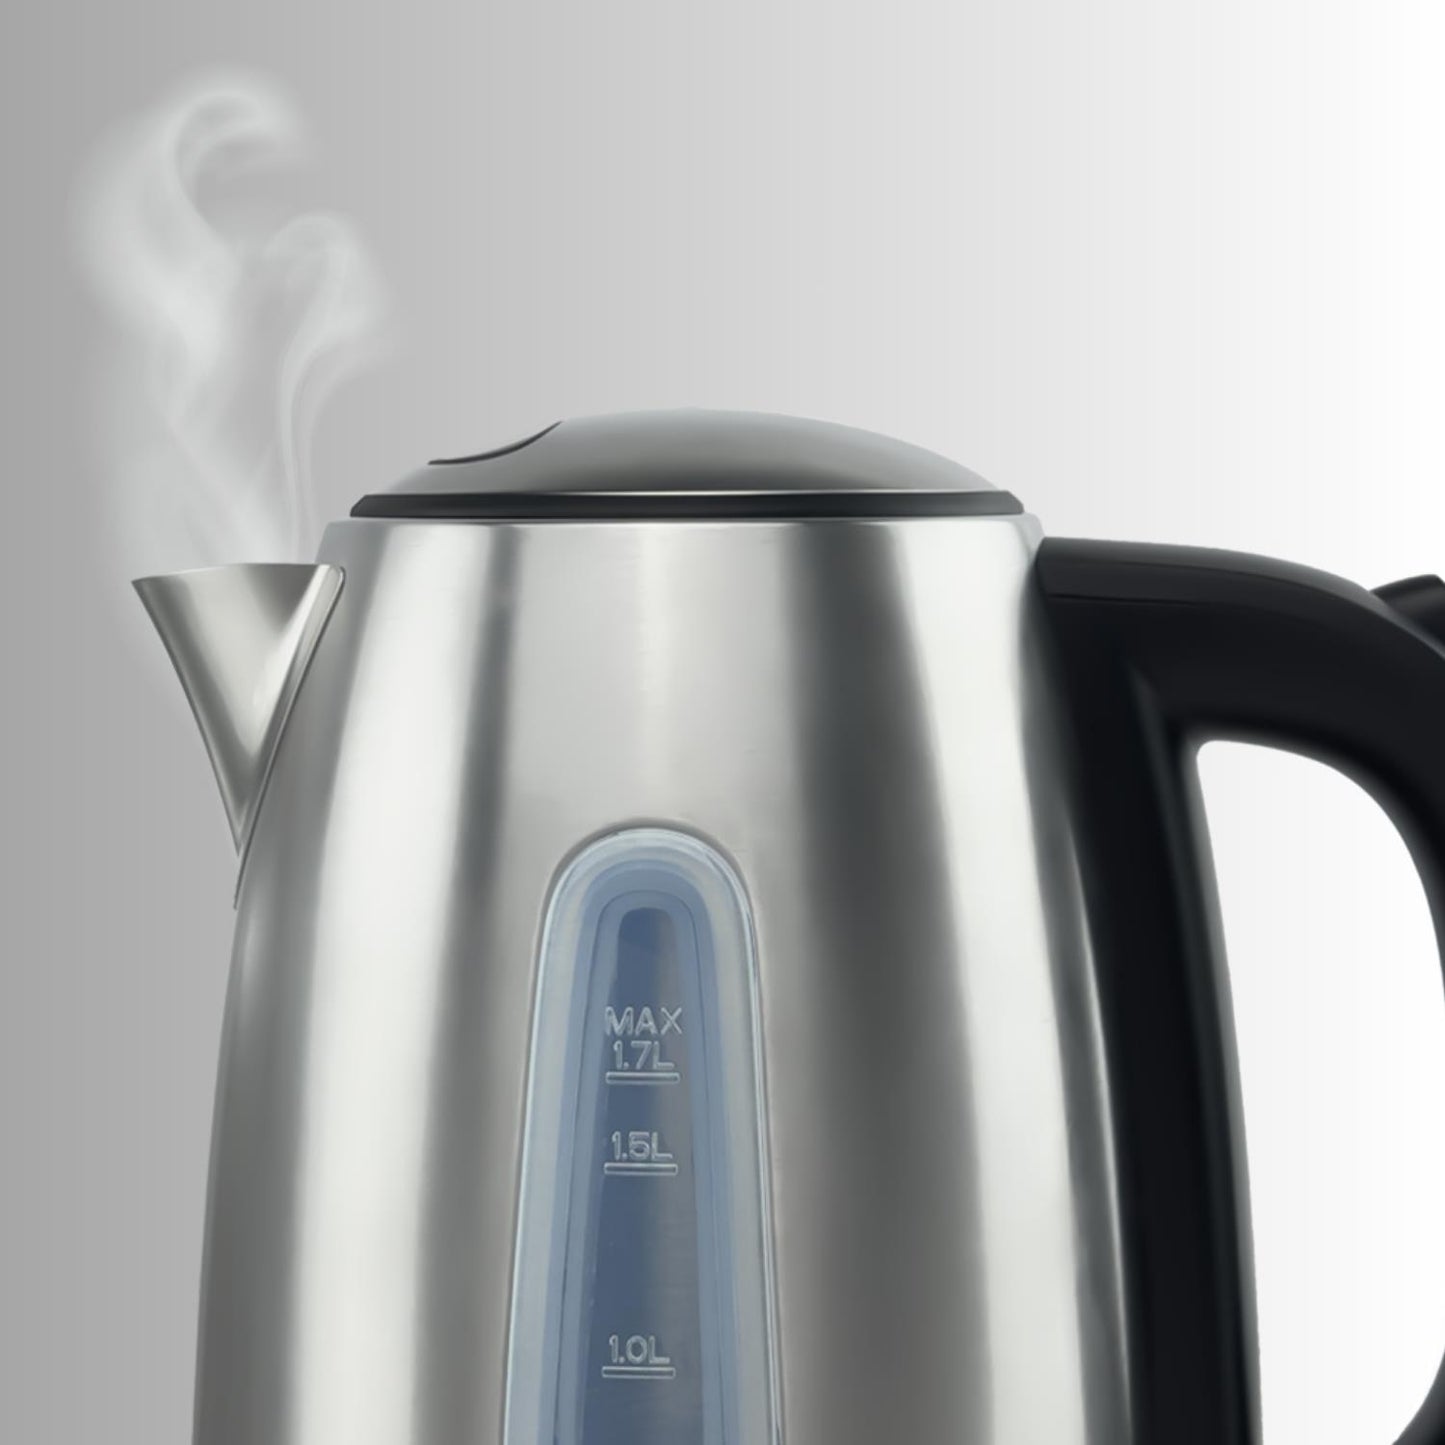 Hamilton Beach Rise 1.7L Polished Stainless Steel Kettle